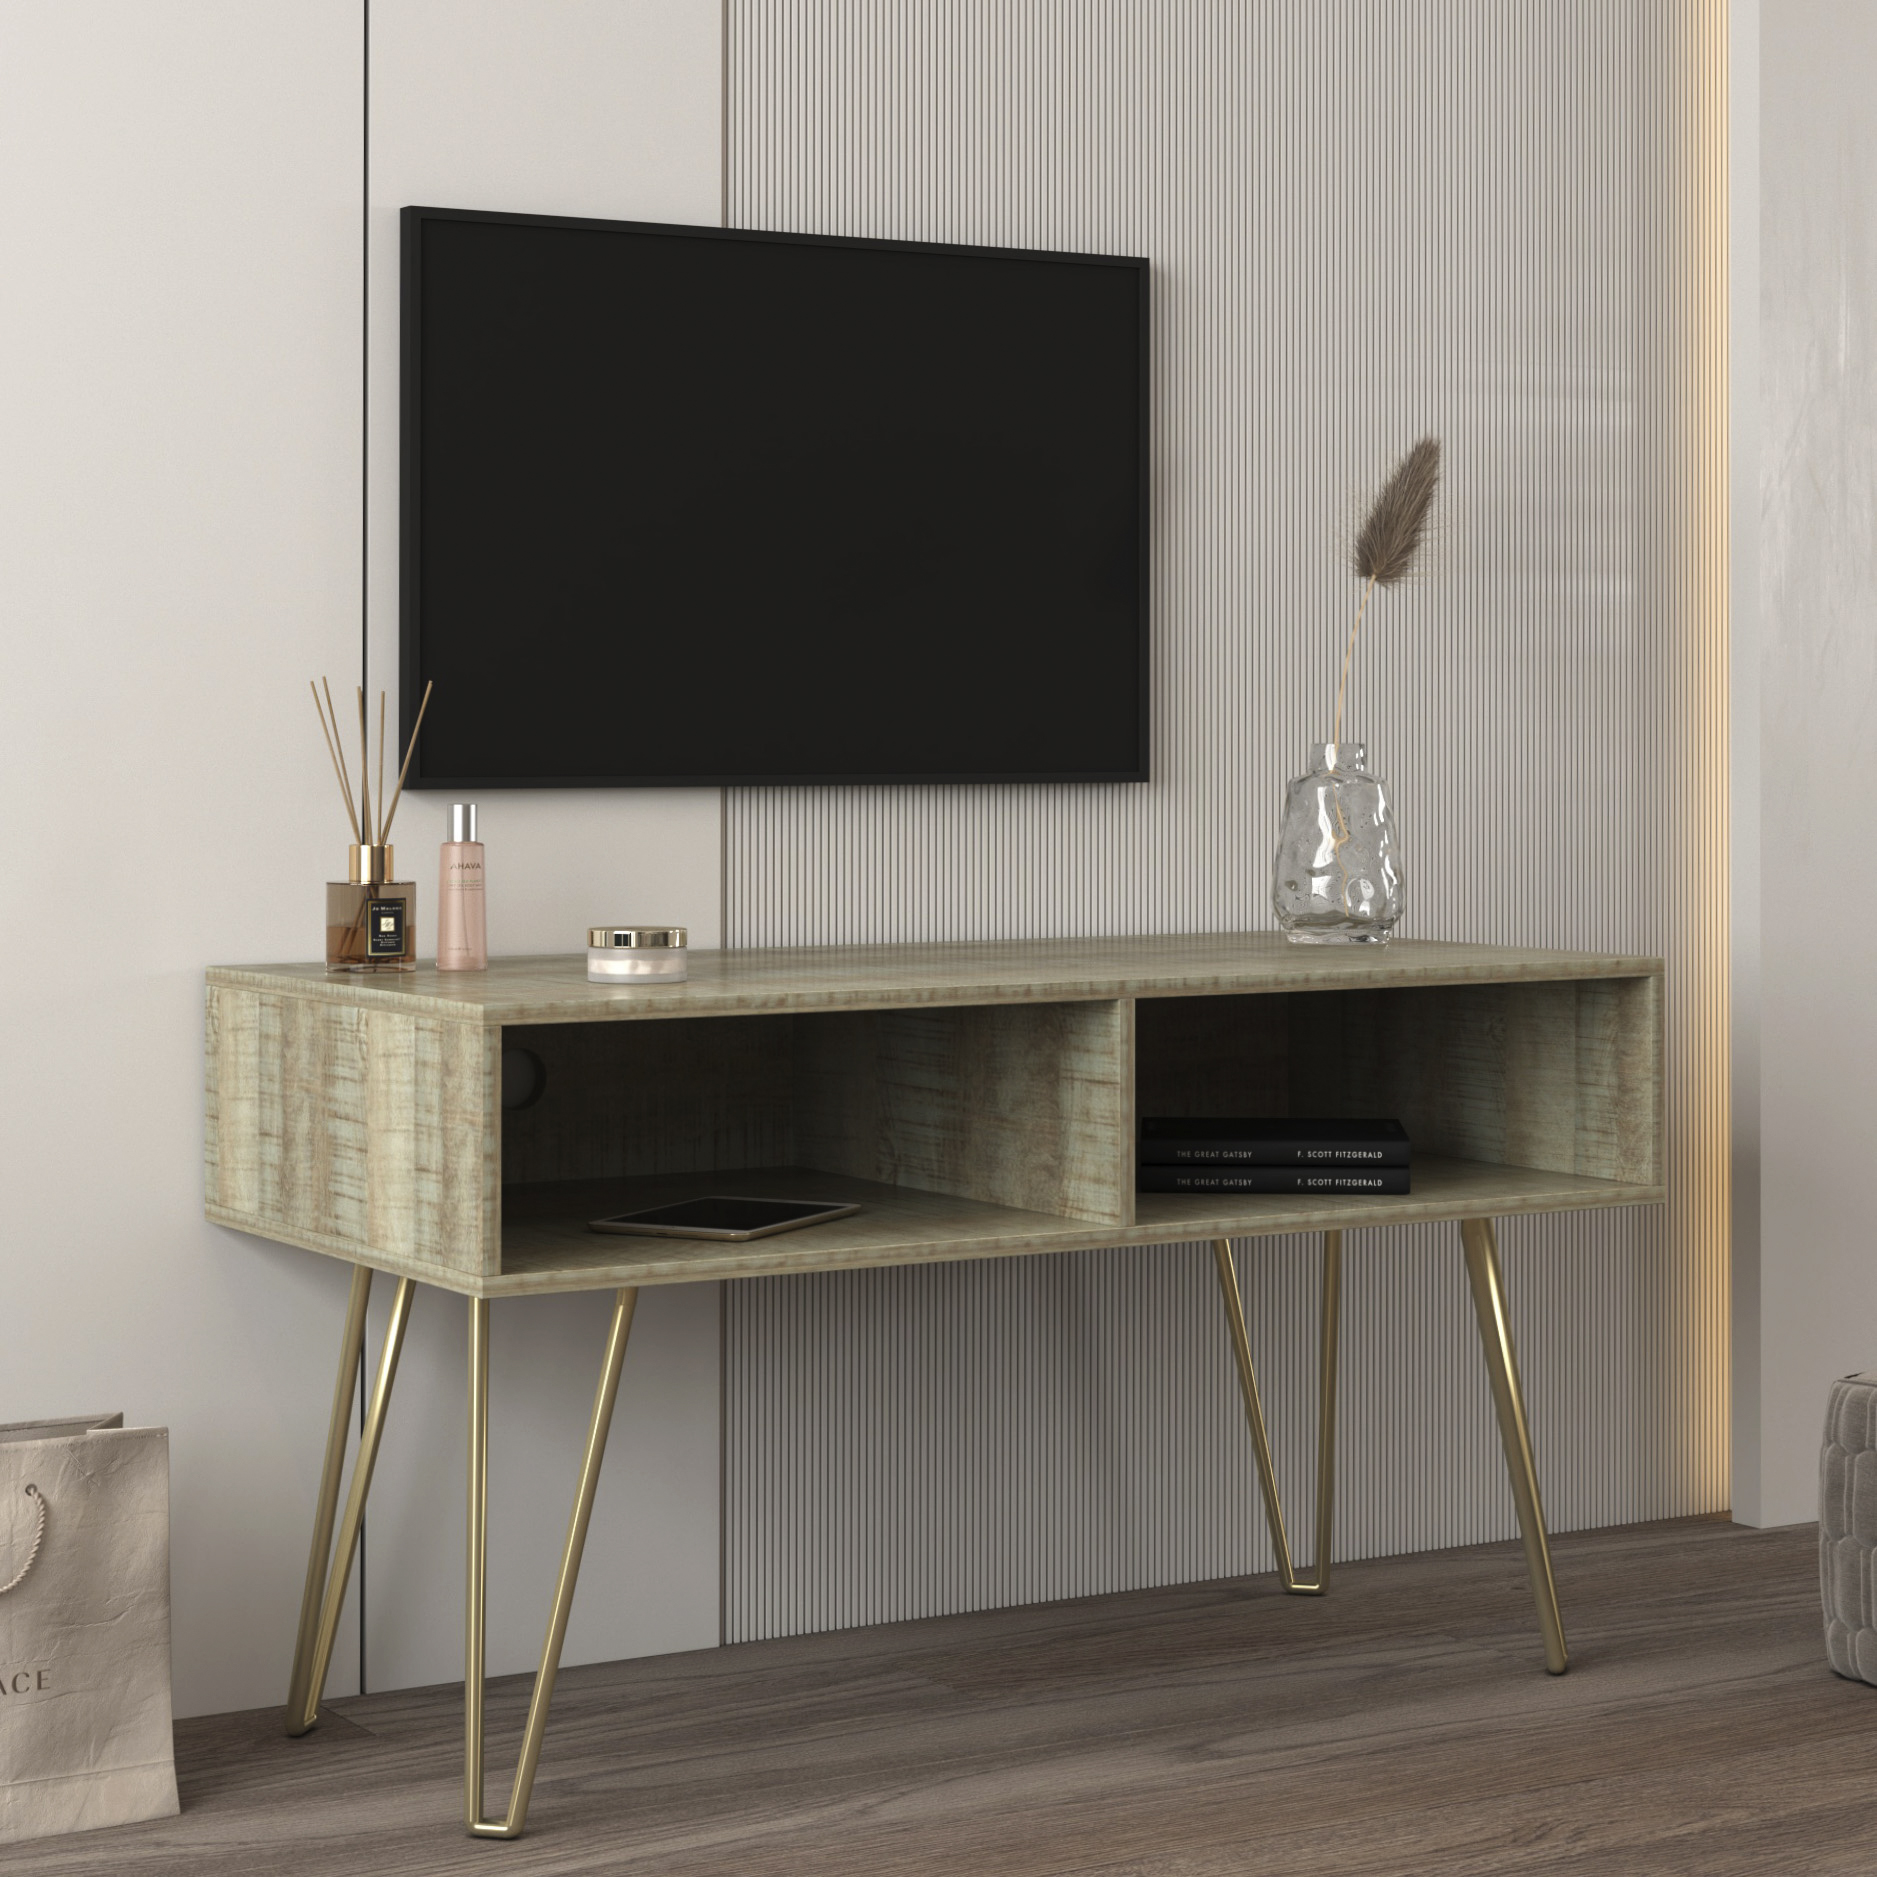 Modern Design TV stand stable Metal Legs  with 2 open shelves to put TV, DVD, router, books, and small ornaments,Grey-CASAINC